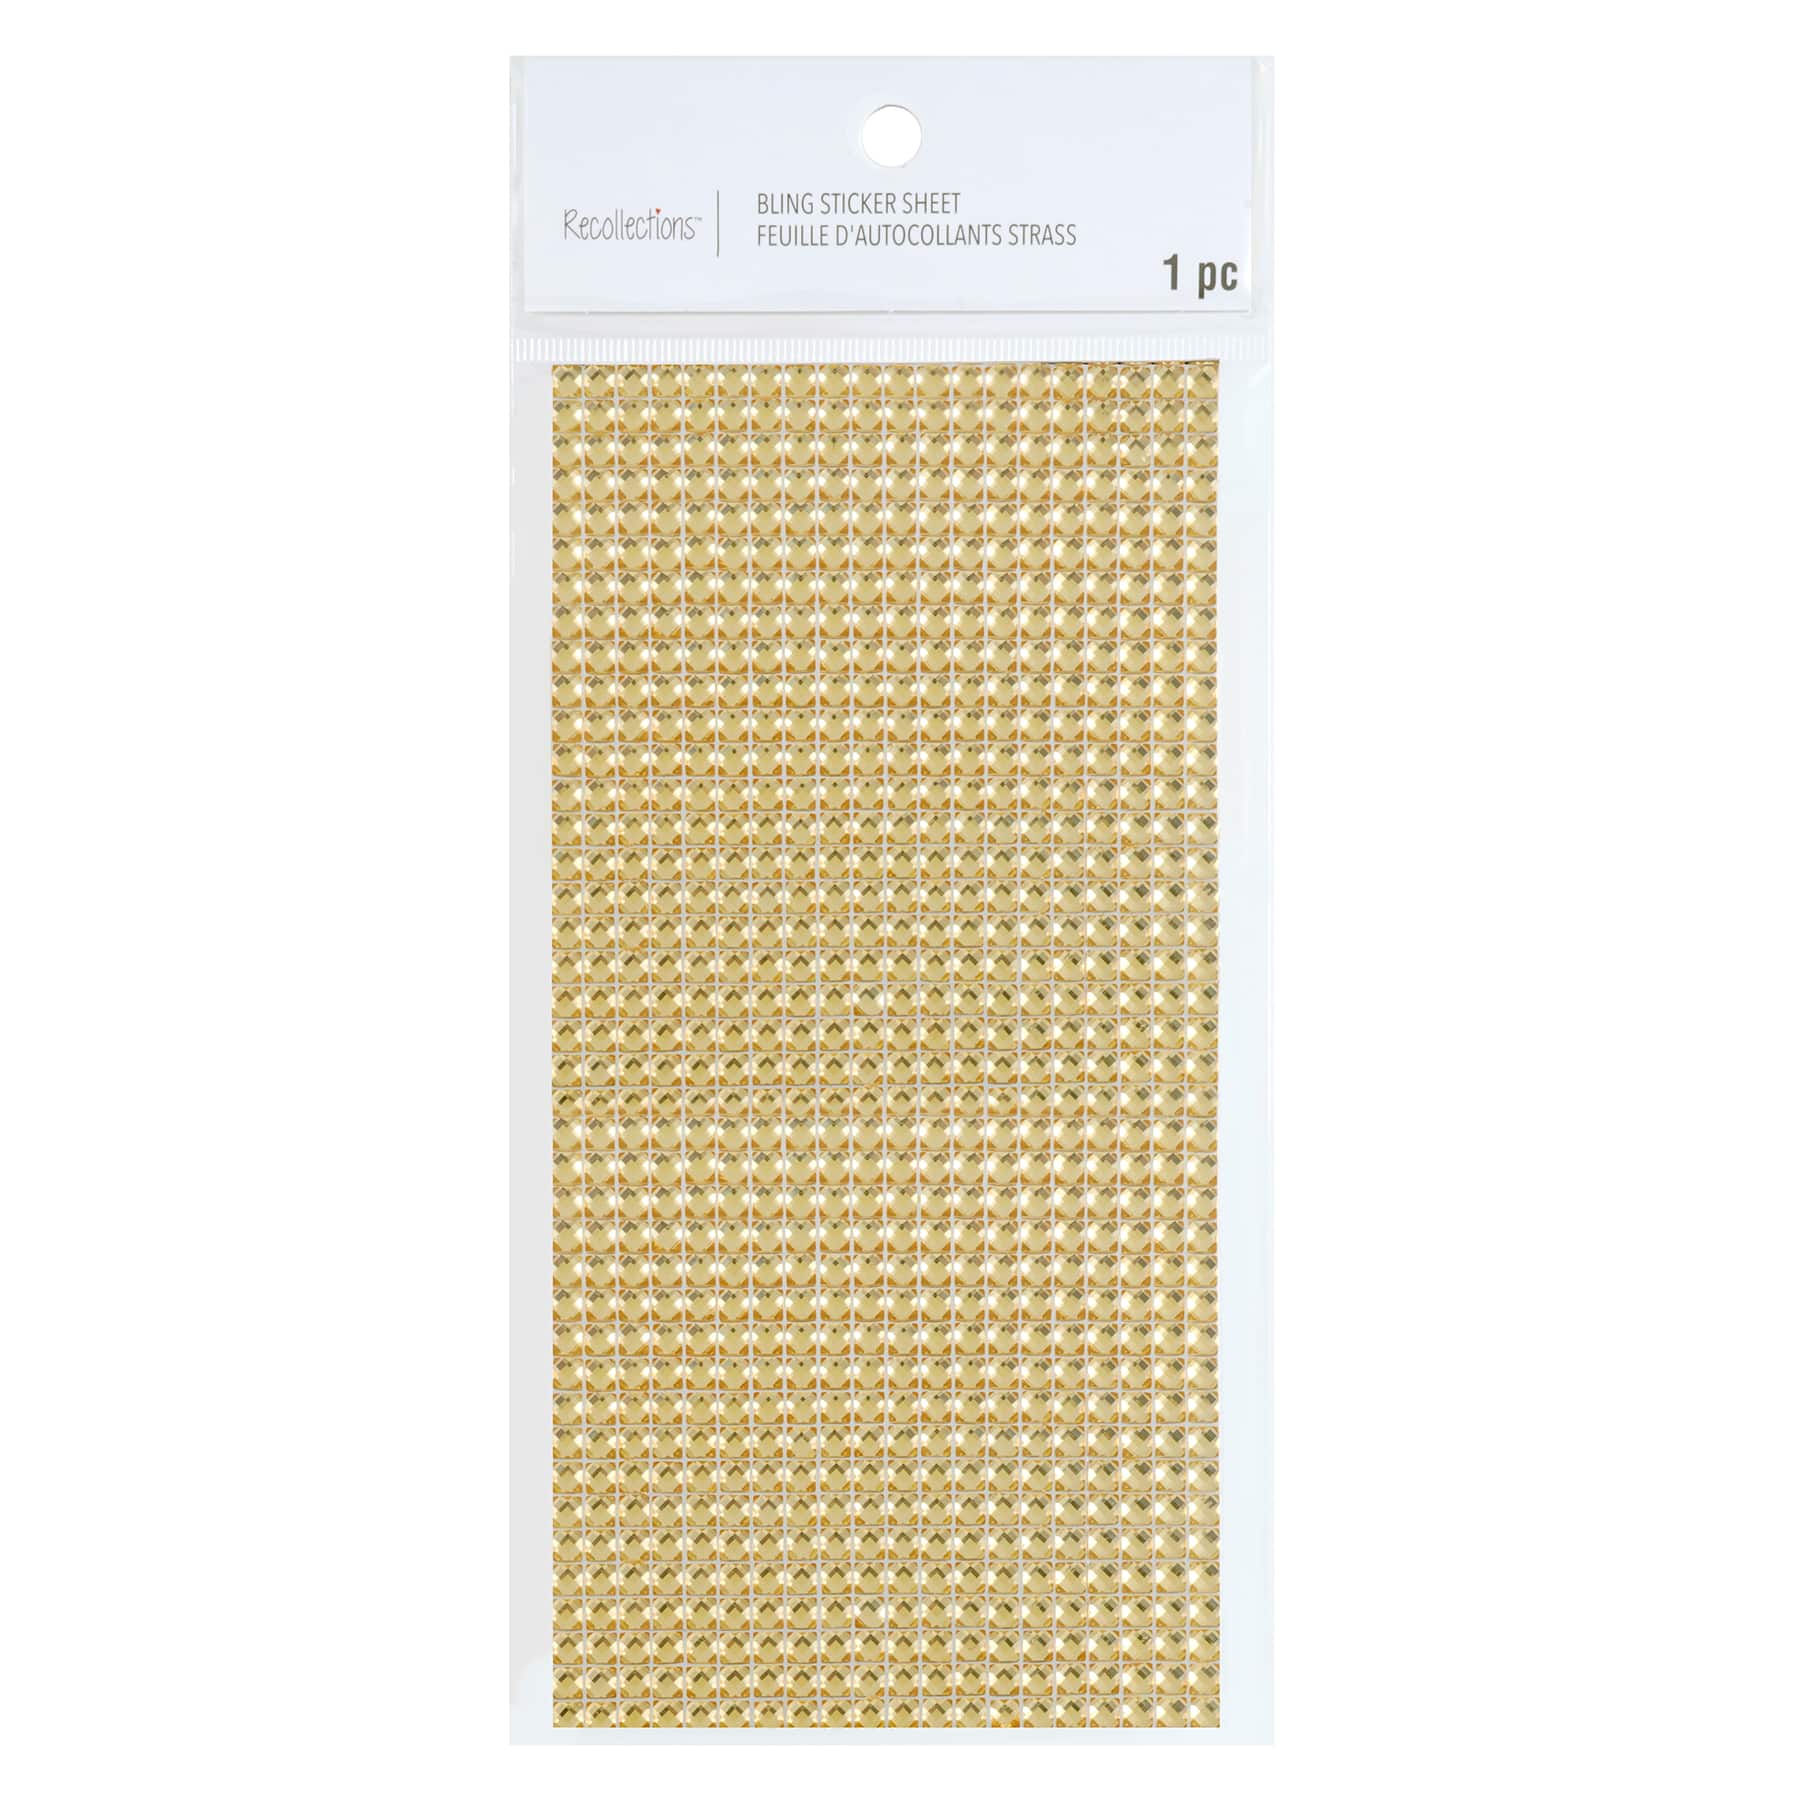 Rhinestones Sheet by Recollections™